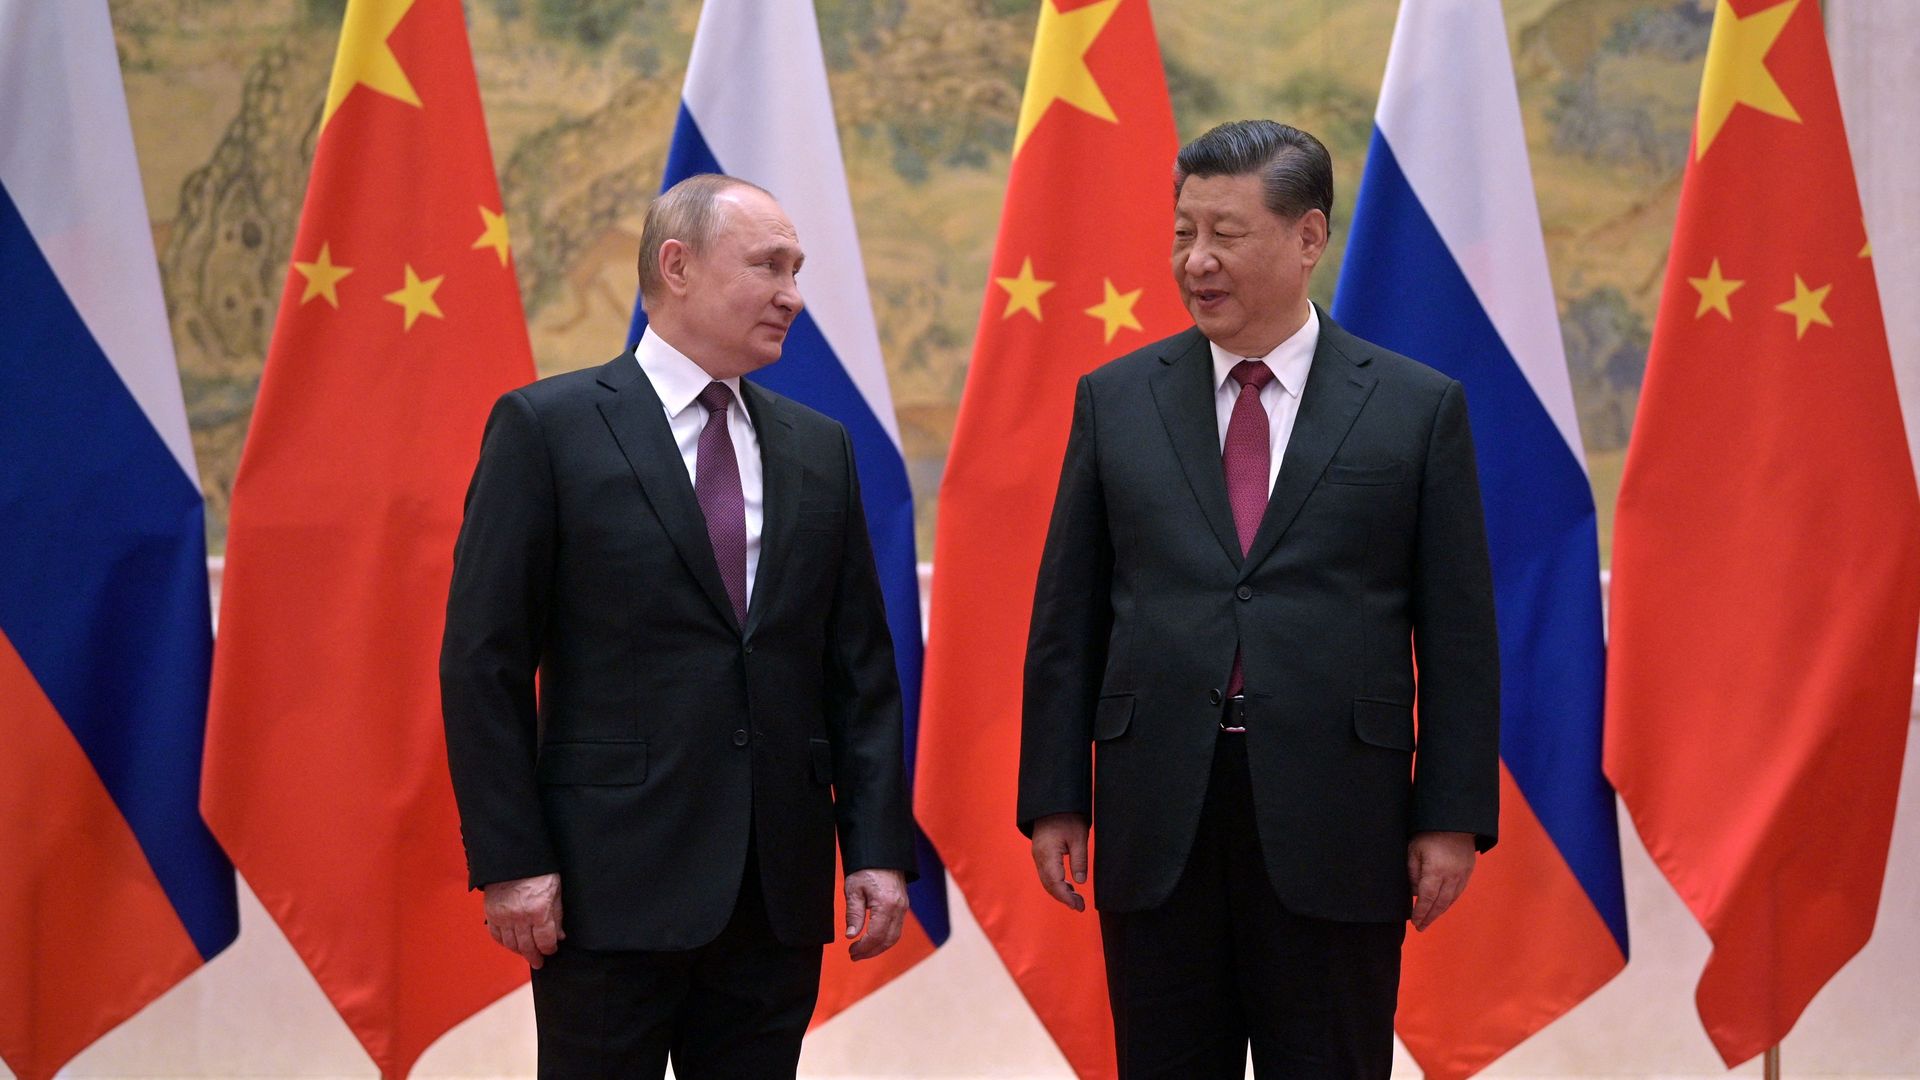 Russian President Vladimir Putin (L) and Chinese President Xi Jinping pose during their meeting in Beijing, on February 4, 2022.